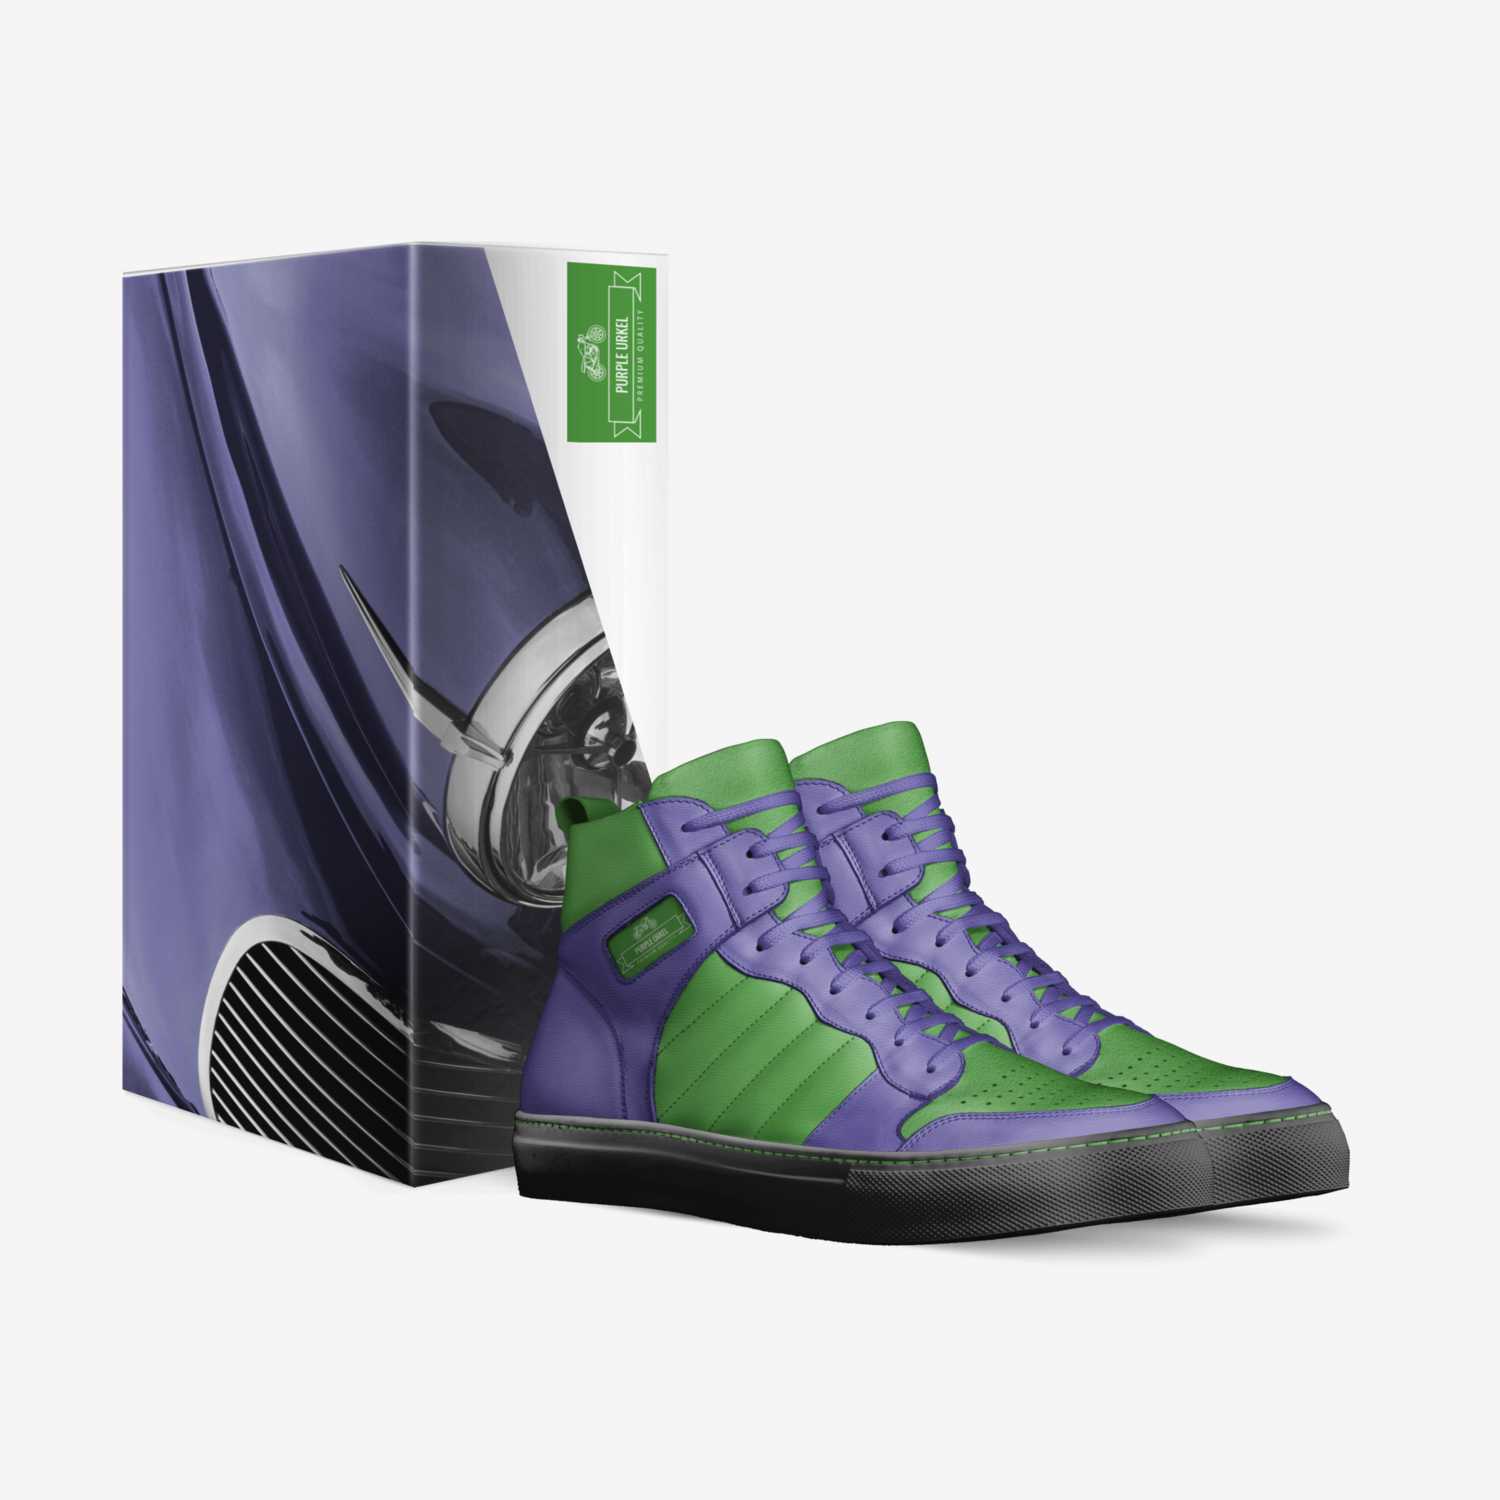 Purple urkel custom made in Italy shoes by Exzavius Phinisee | Box view